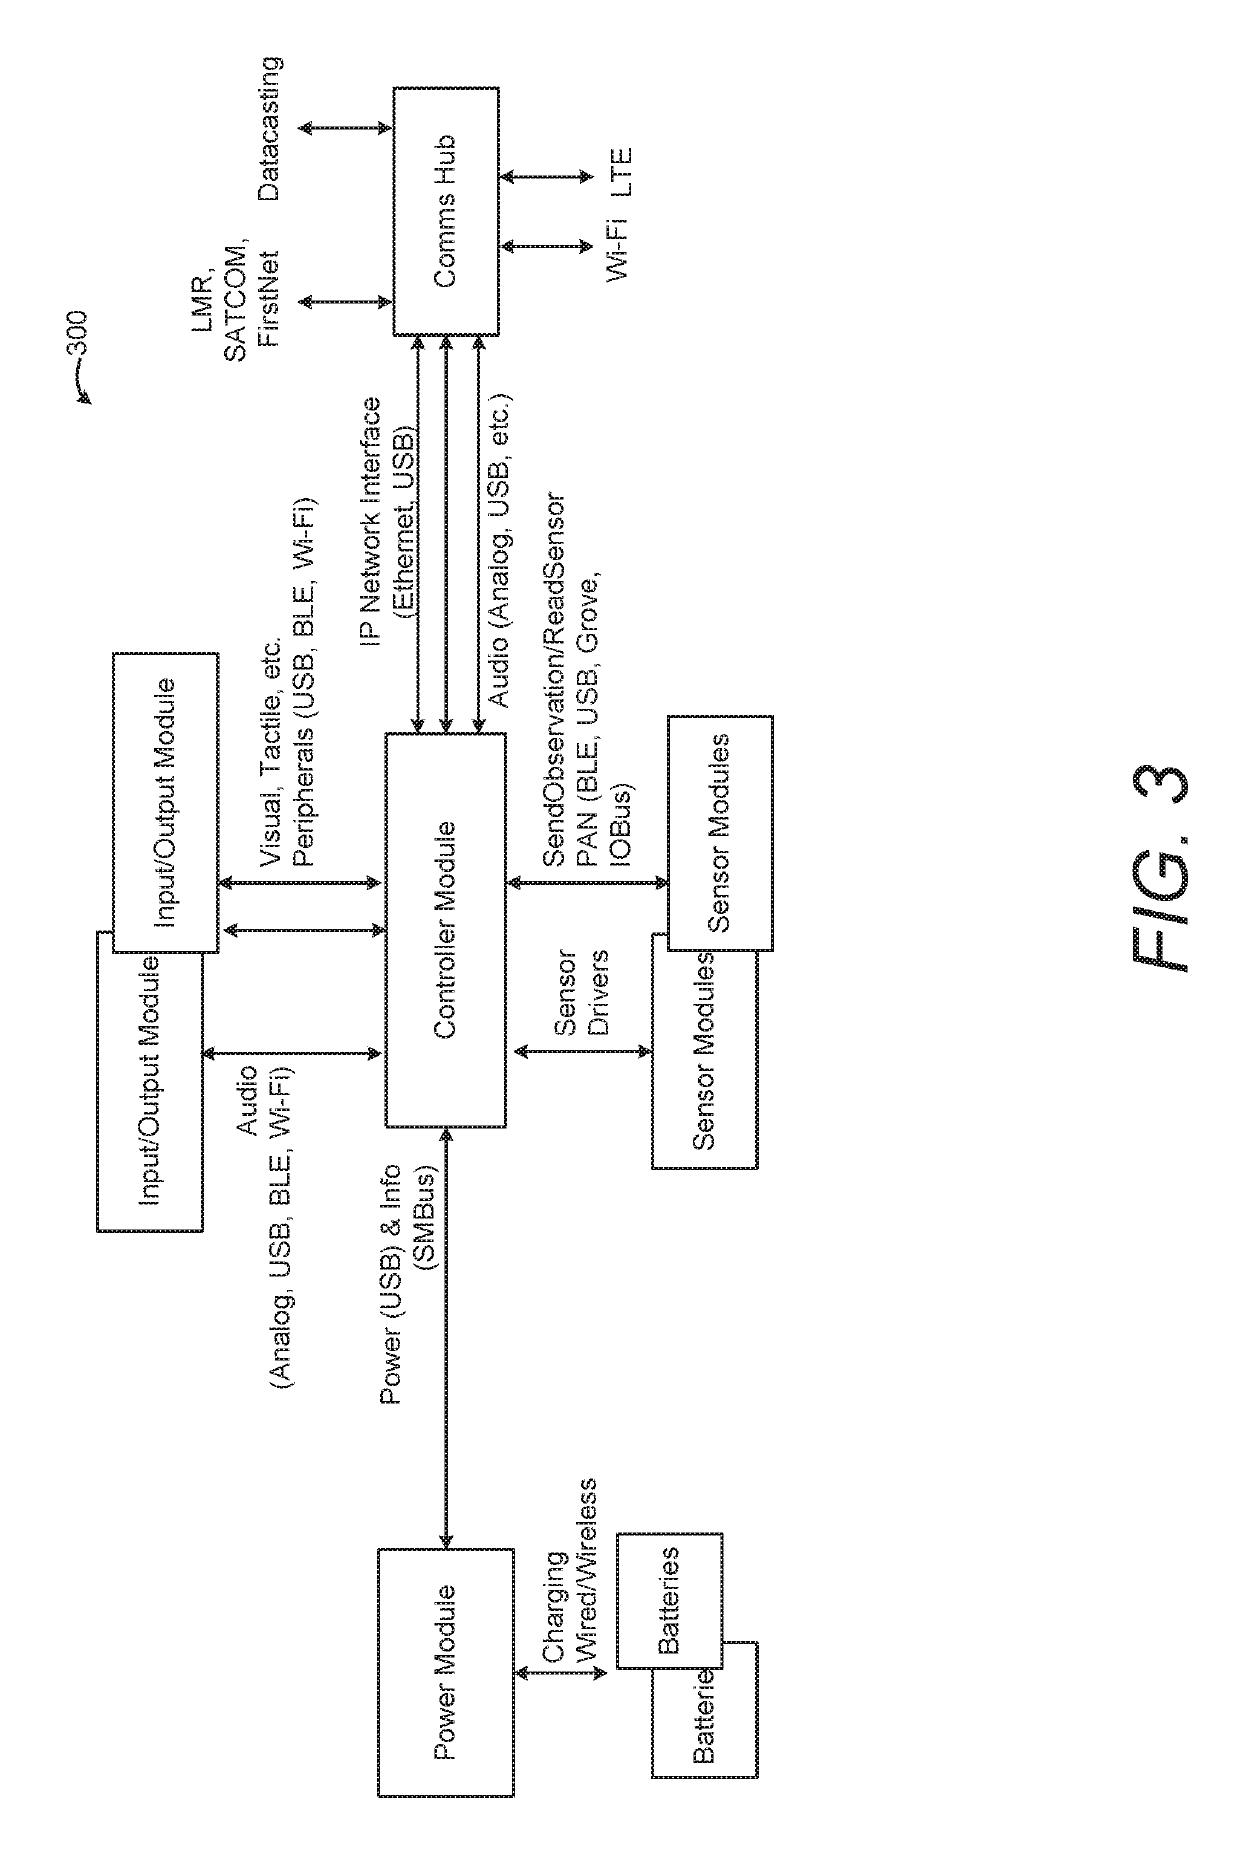 Systems and Methods for Integrating First Responder Technologies